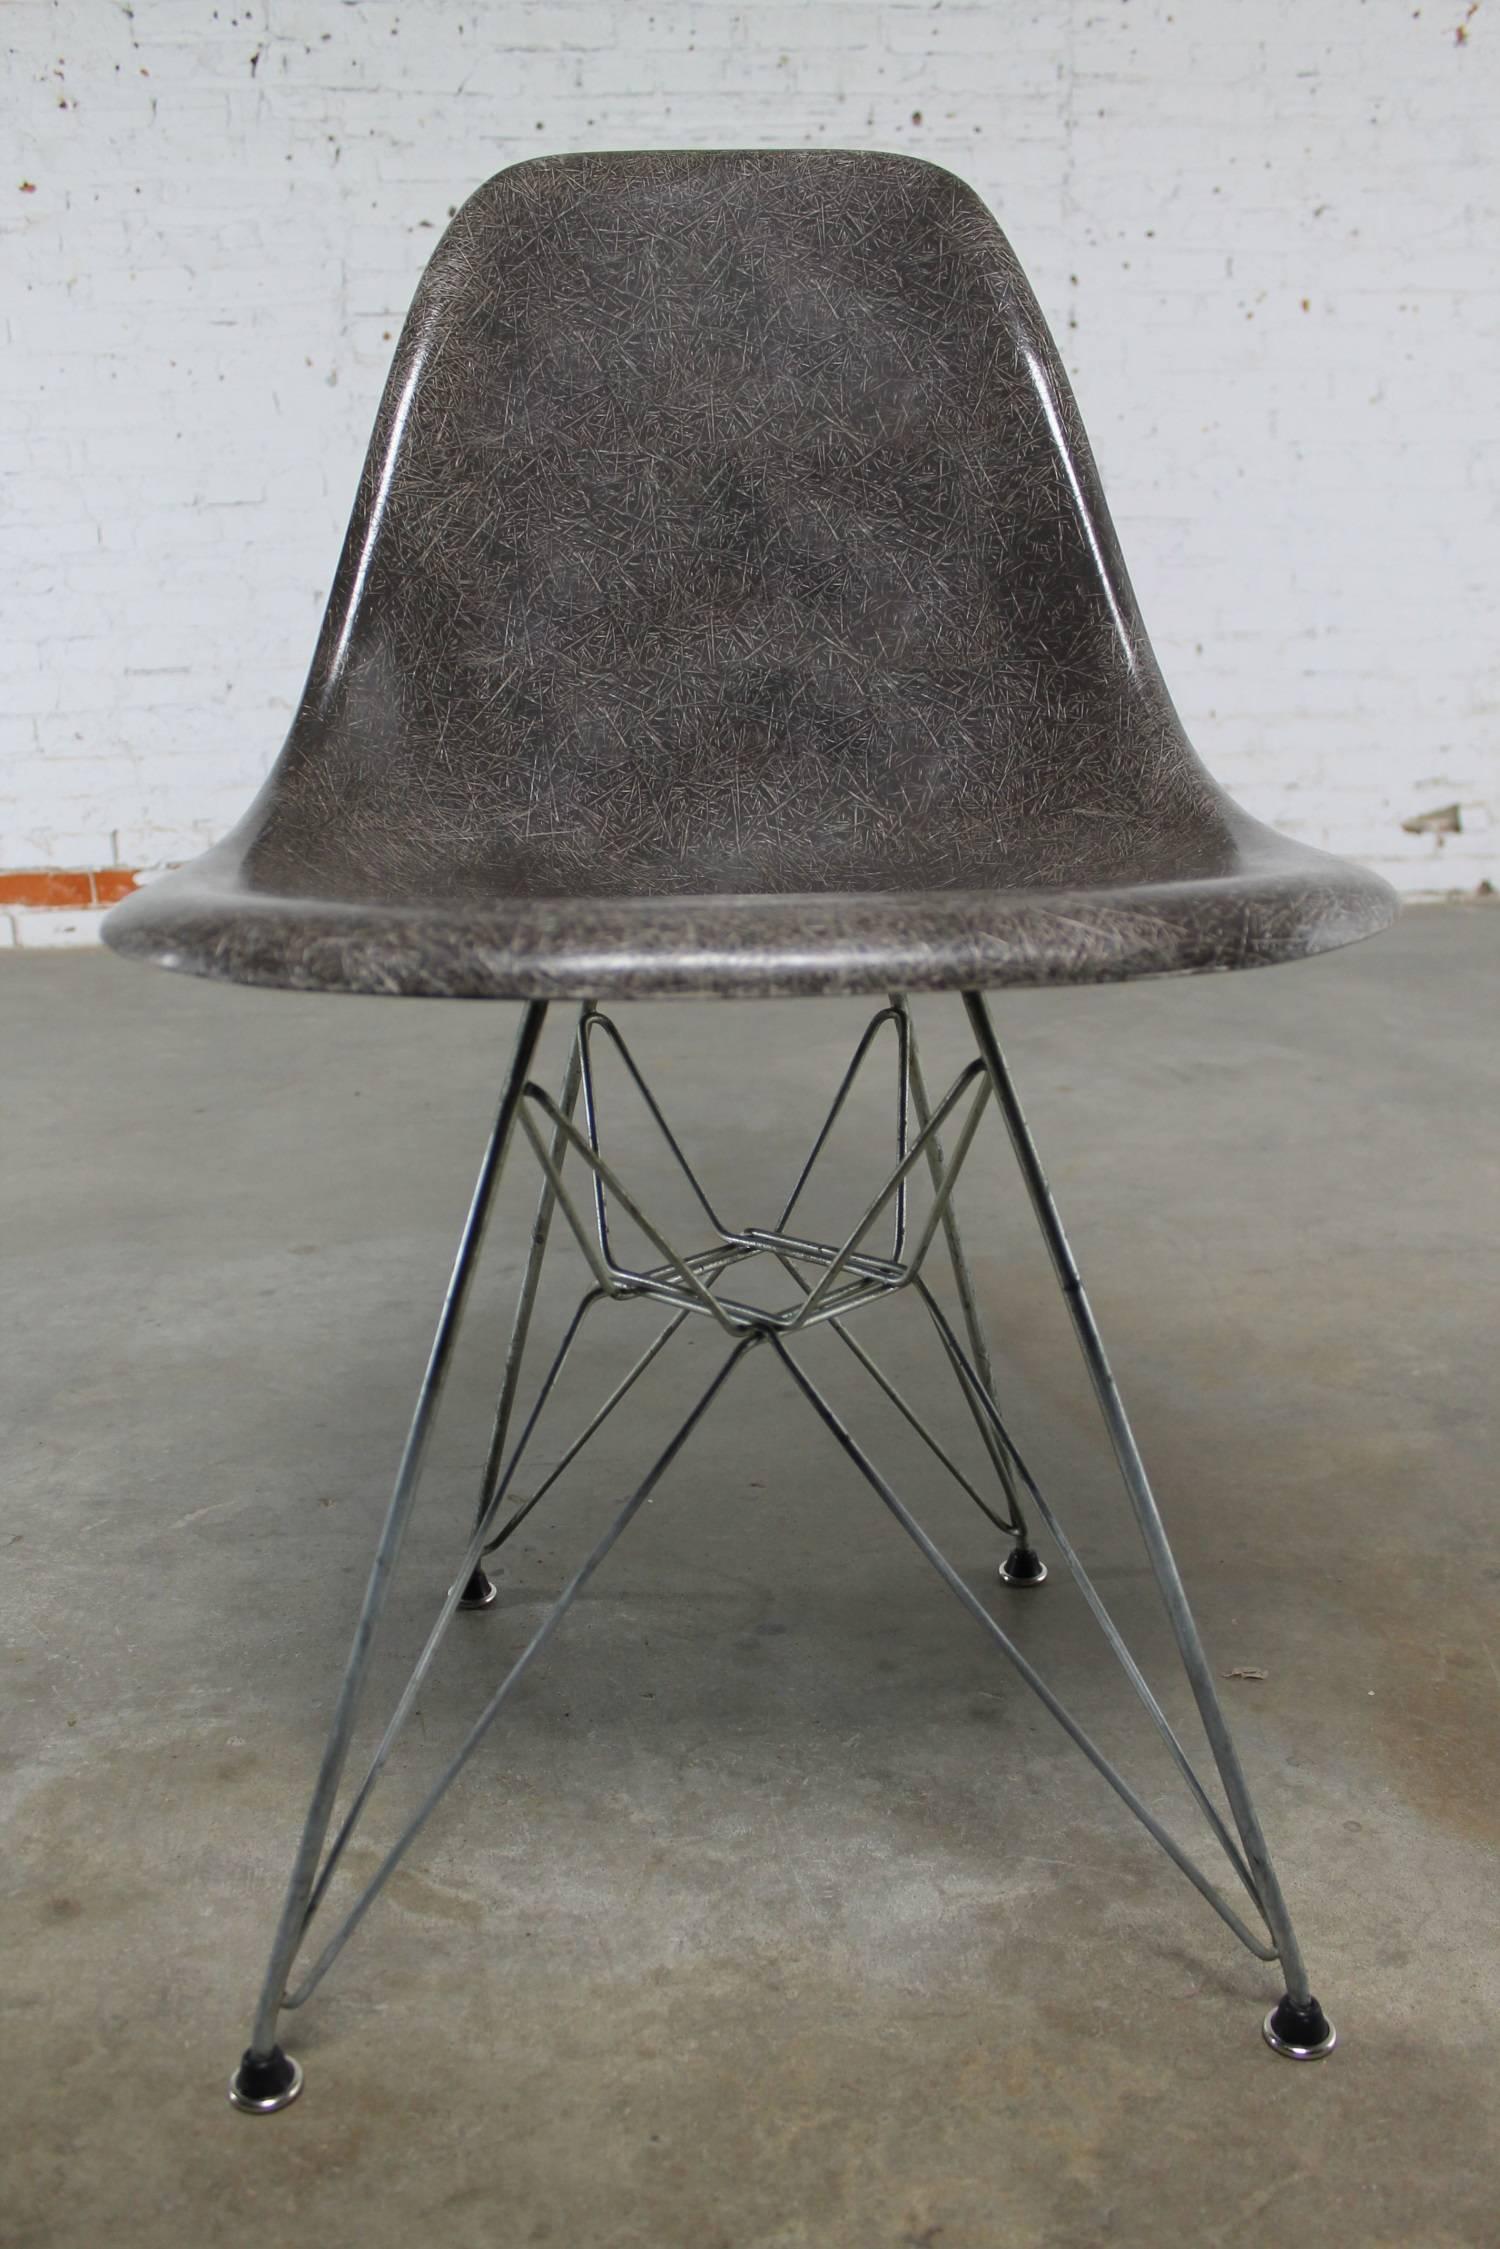 Vintage Herman Miller fiberglass side chair designed by Charles and Ray Eames. This one with an Eiffel Tower base (DSR) in elephant hide grey, circa 1976 and in wonderful vintage condition.

This is a fabulous vintage DSR chair and in such a